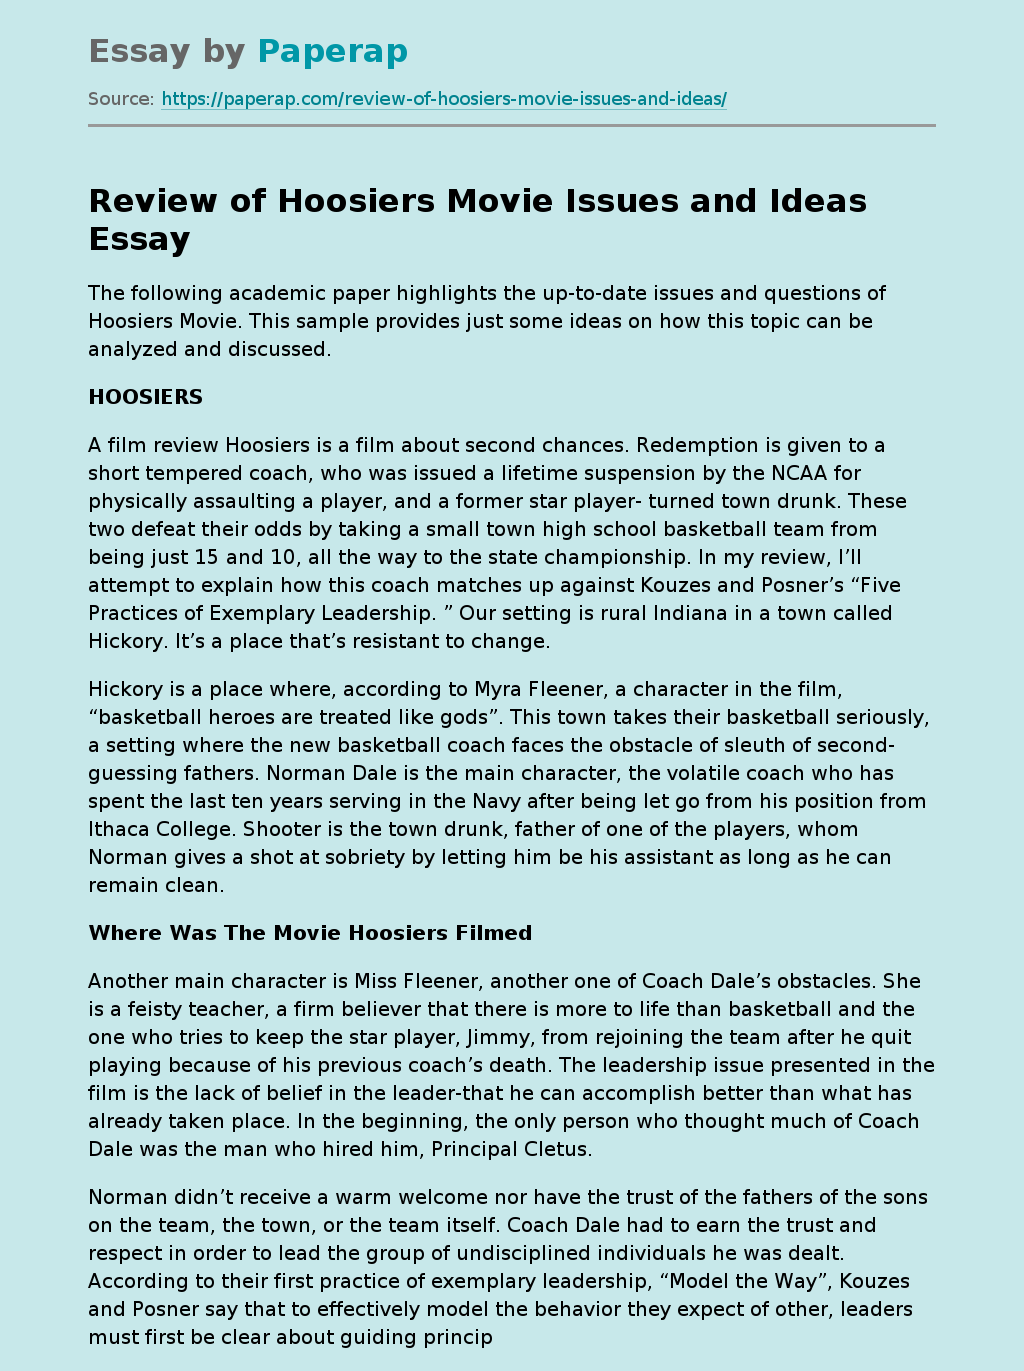 Review of Hoosiers Movie Issues and Ideas